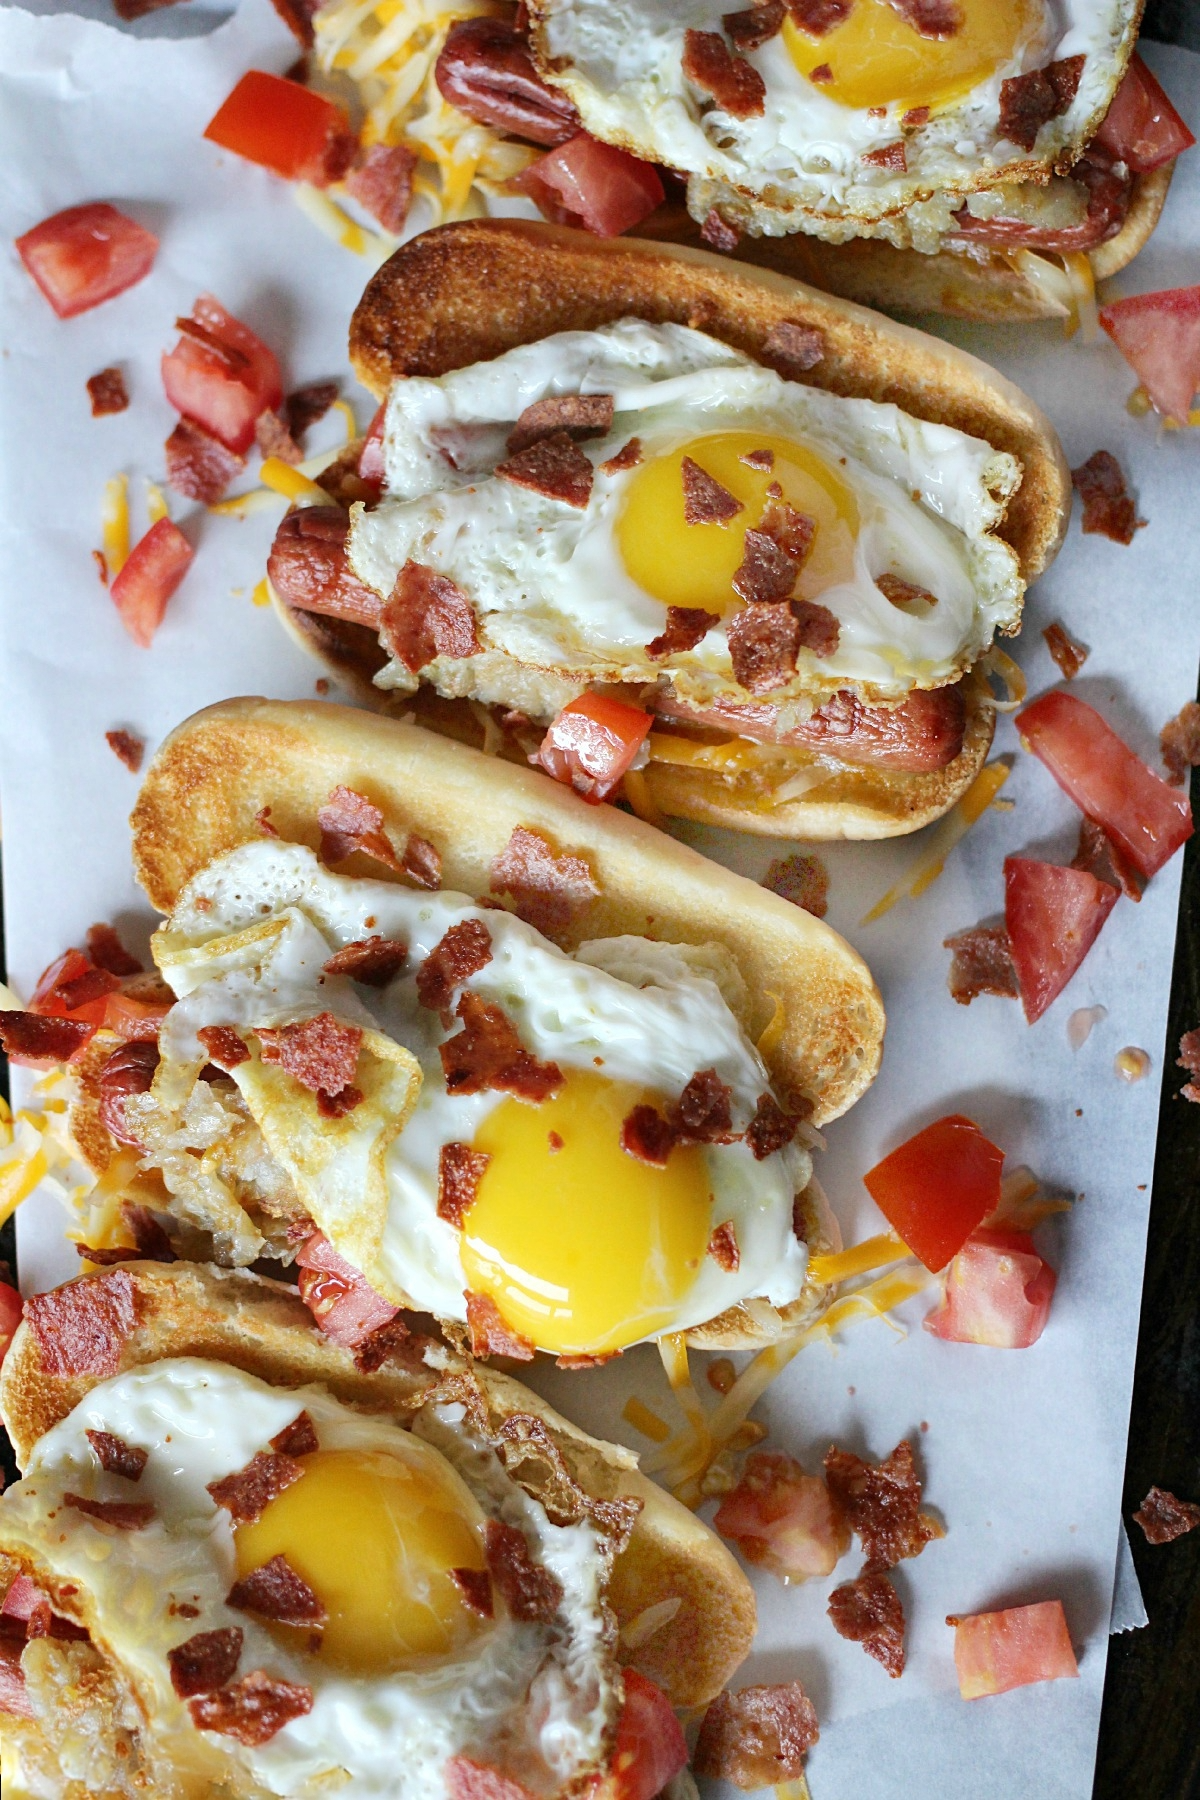 The ultimate breakfast hot dog is a fully loaded hot dog with ingredients that makes it perfect for breakfast, brunch, lunch and even dinner.